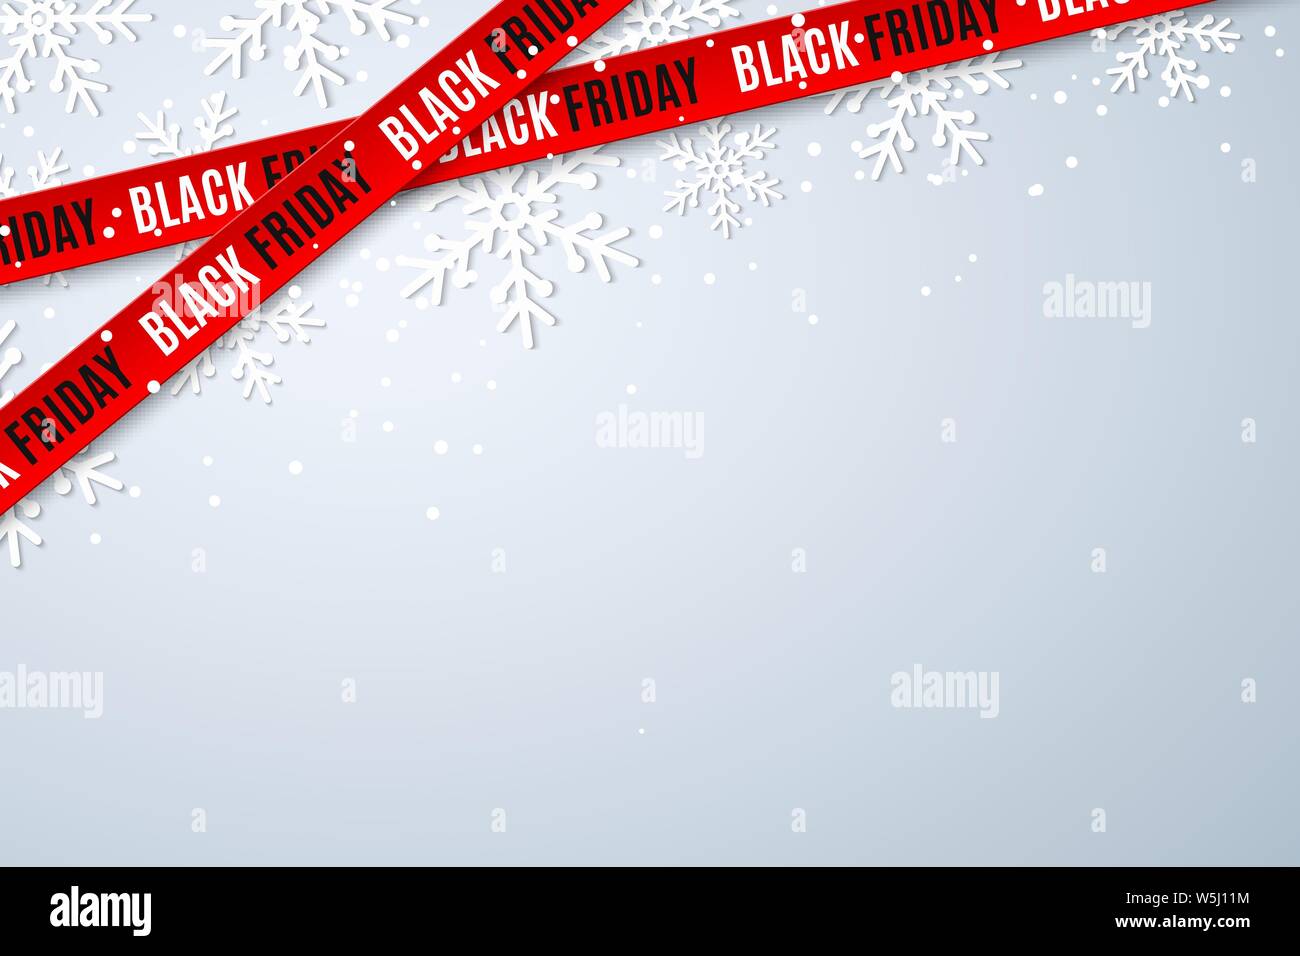 Template for Black Friday sale on light background with snowflakes. Crossed red ribbons with text. Super seasonal sale. Festive graphic elements. Vect Stock Vector